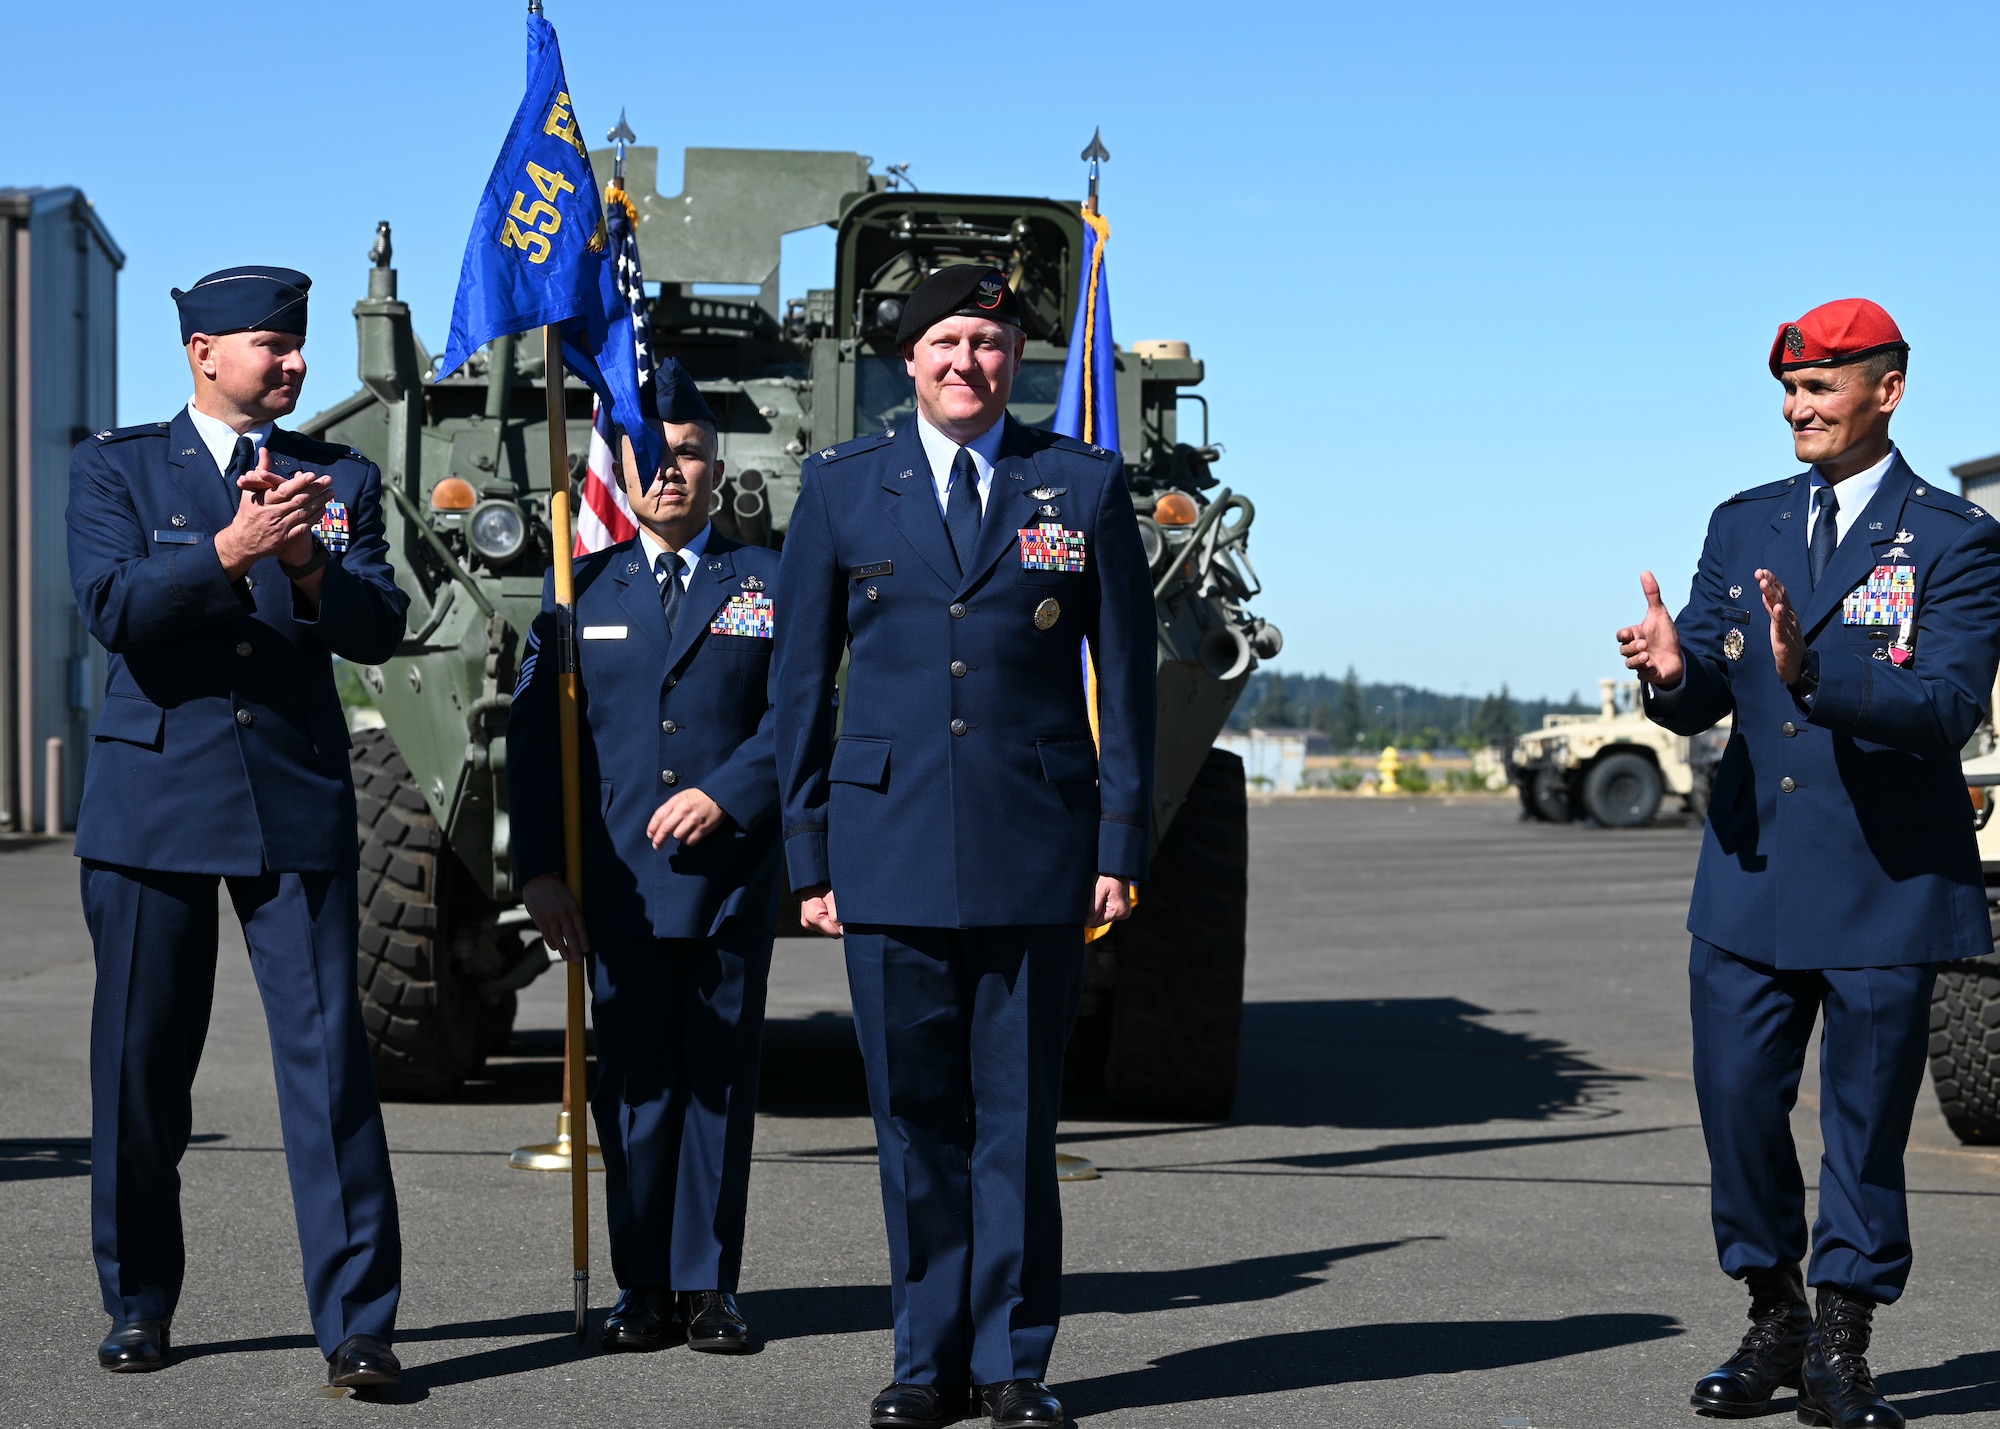 U.S. Air Force Col. David Berkland, left, commander of the 354th Fighter Wing, and Col. Travis Woodworth, right, outgoing commander of the 1st Air Support Operations Group, clap for Col. John Blocher, incoming commander of the 1st ASOG, as he assumes command of the 1st ASOG, during a change of command ceremony at Joint Base Lewis-McChord, Washington, August 15, 2022. The 1st ASOG provides an Air Support Operations Center, Tactical Air Control Parties and Battlefield Weather Teams to Army combat units at multiple echelons including United States Army Pacific, I Corps, and nine aviation, airborne, infantry and Stryker brigade combat teams of the 2nd and 25th Infantry Divisions. (U.S. Air Force photo by Senior Airman Callie Norton)